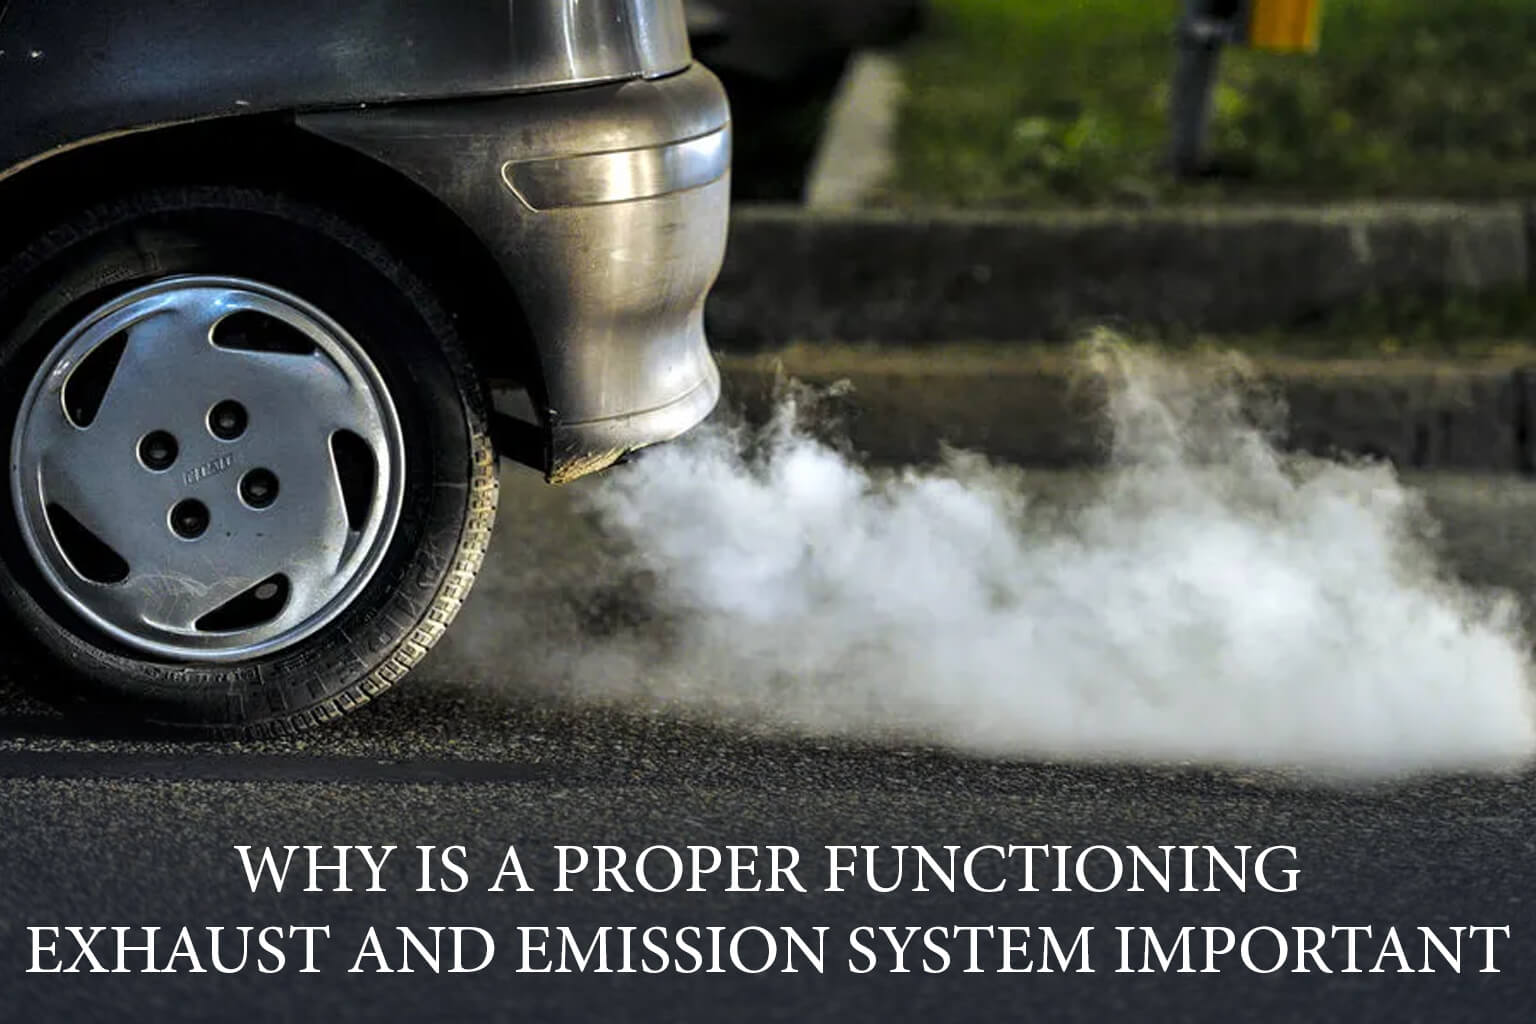 Why Is a Proper Functioning Exhaust and Emission System important